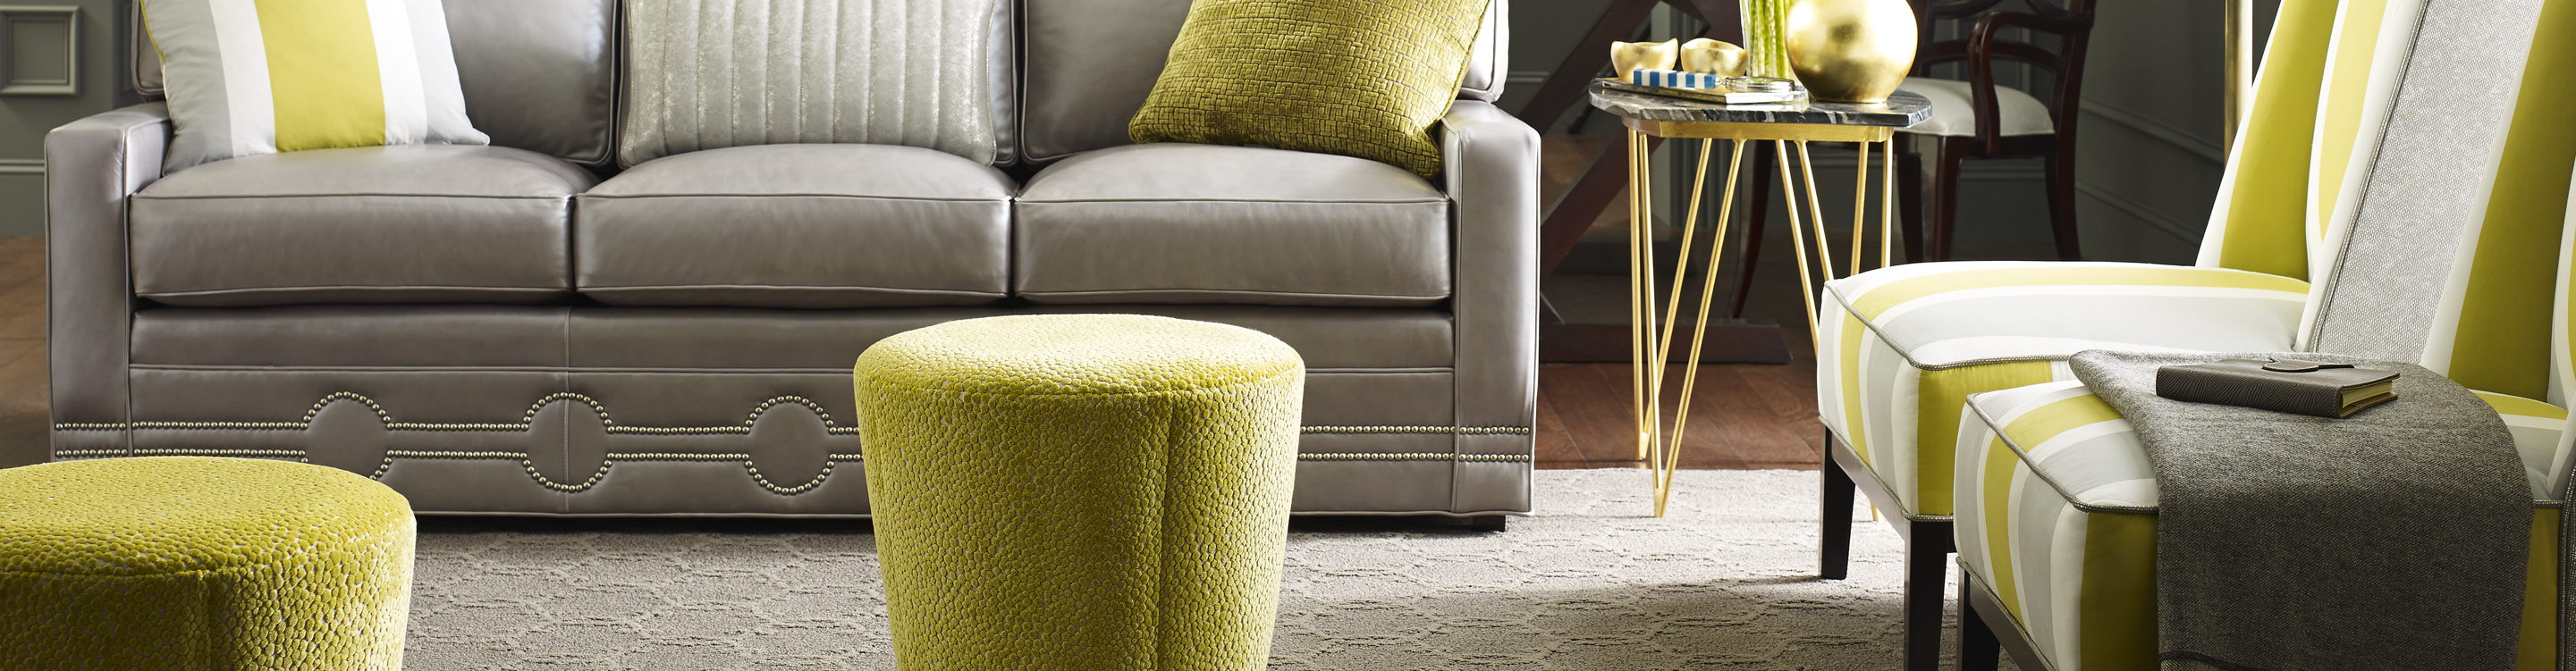 neutral textured light brown area rug in living area with grey and lime green furniture